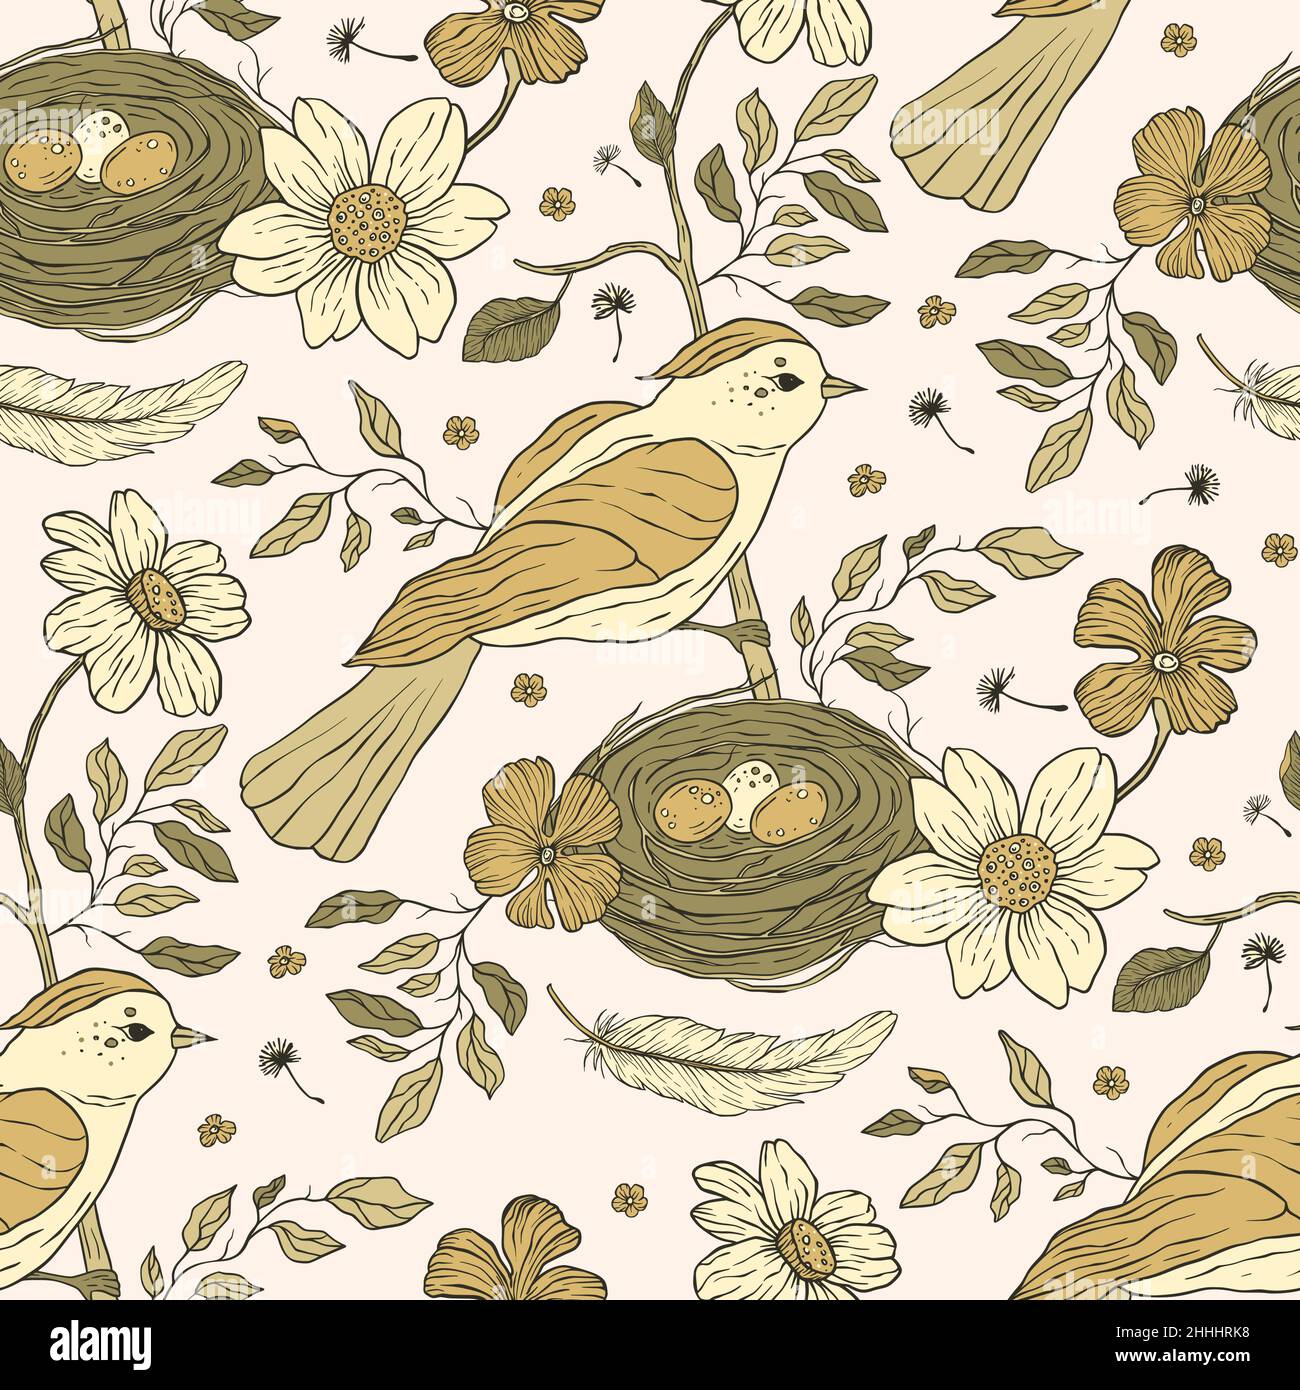 Vintage aesthetic bird nest boho floral seamless pattern with flower Stock Vector